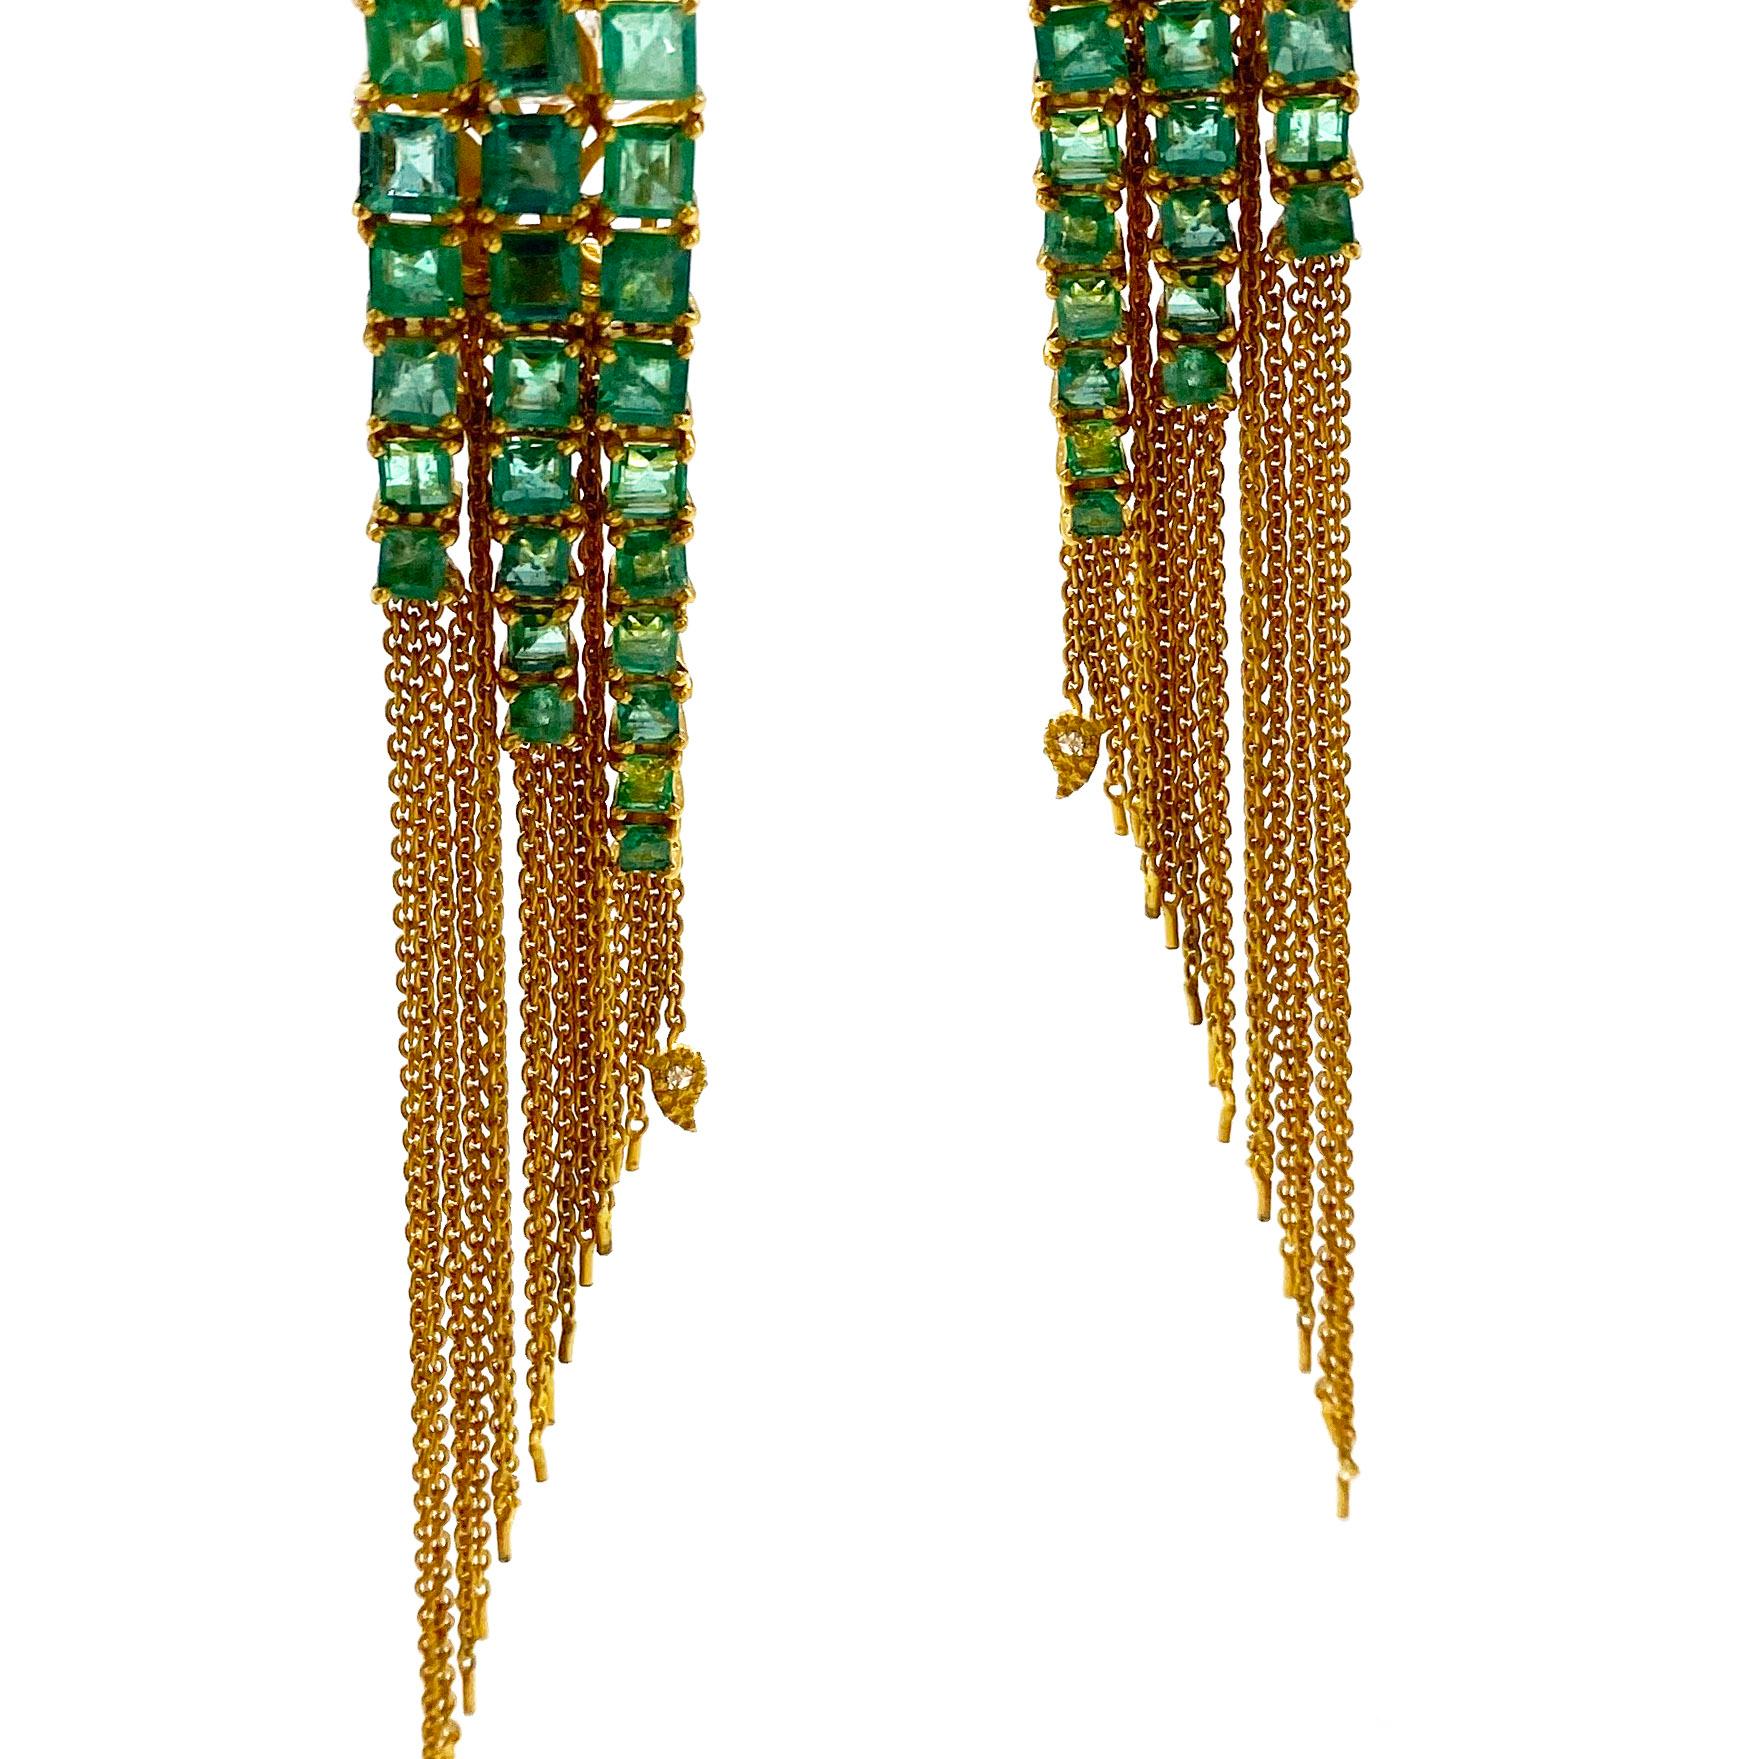 Statement Elegant Handmade Tassel earrings set in 20 Karat Yellow Gold with Emerald weighing approximately 8.80cts and Diamonds 0.80cts, and 20K Yellow Gold chains hanging from emerald. Inspired by Art Deco and Mosaic and brought to you from the